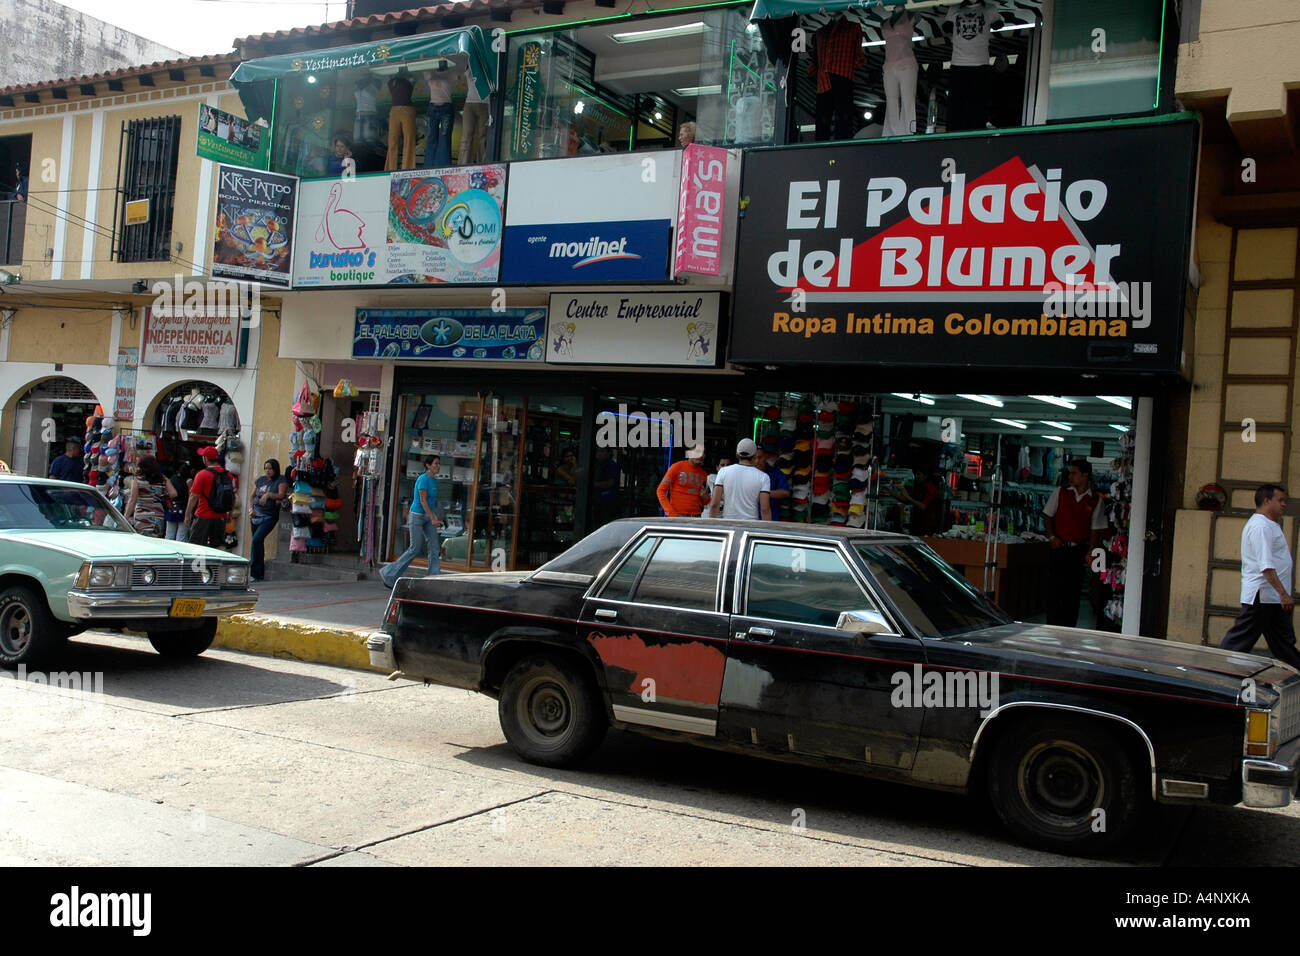 https://c8.alamy.com/comp/A4NXKA/shops-in-busy-downtown-mrida-venezuela-and-one-of-the-popular-old-A4NXKA.jpg